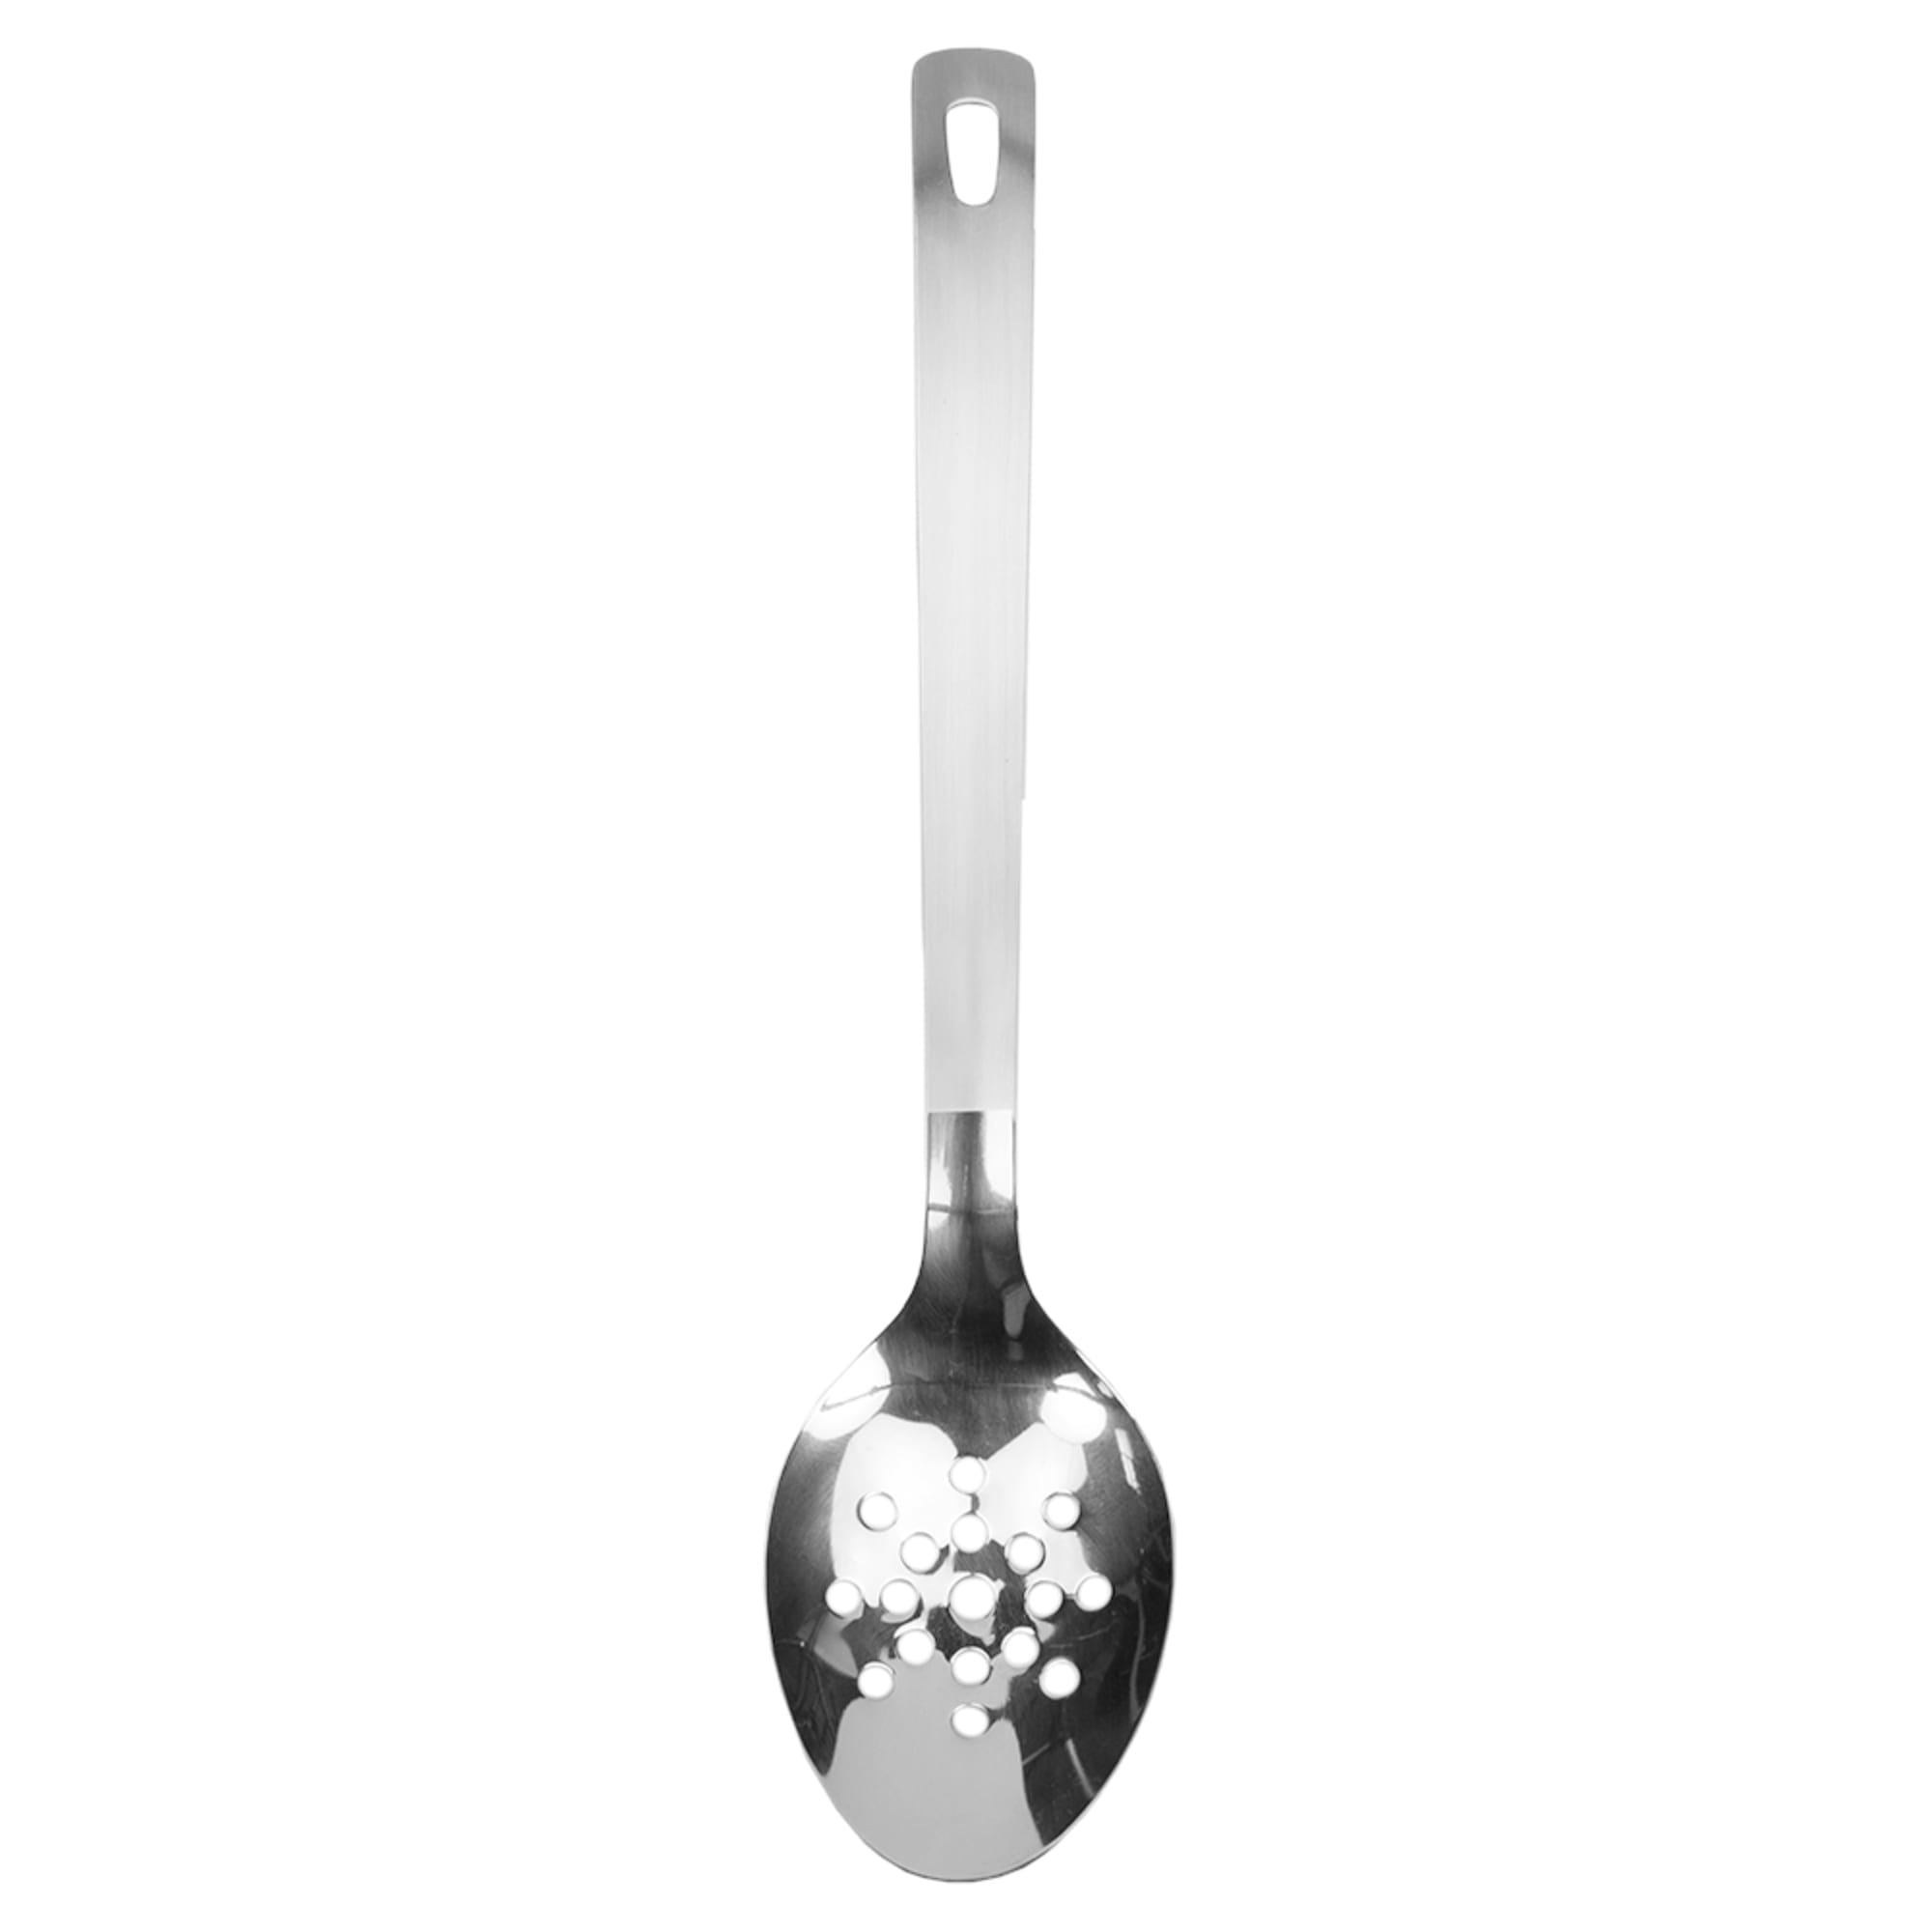 Home Basics Stainless Steel Slotted Serving Spoon, Silver $3.00 EACH, CASE PACK OF 24